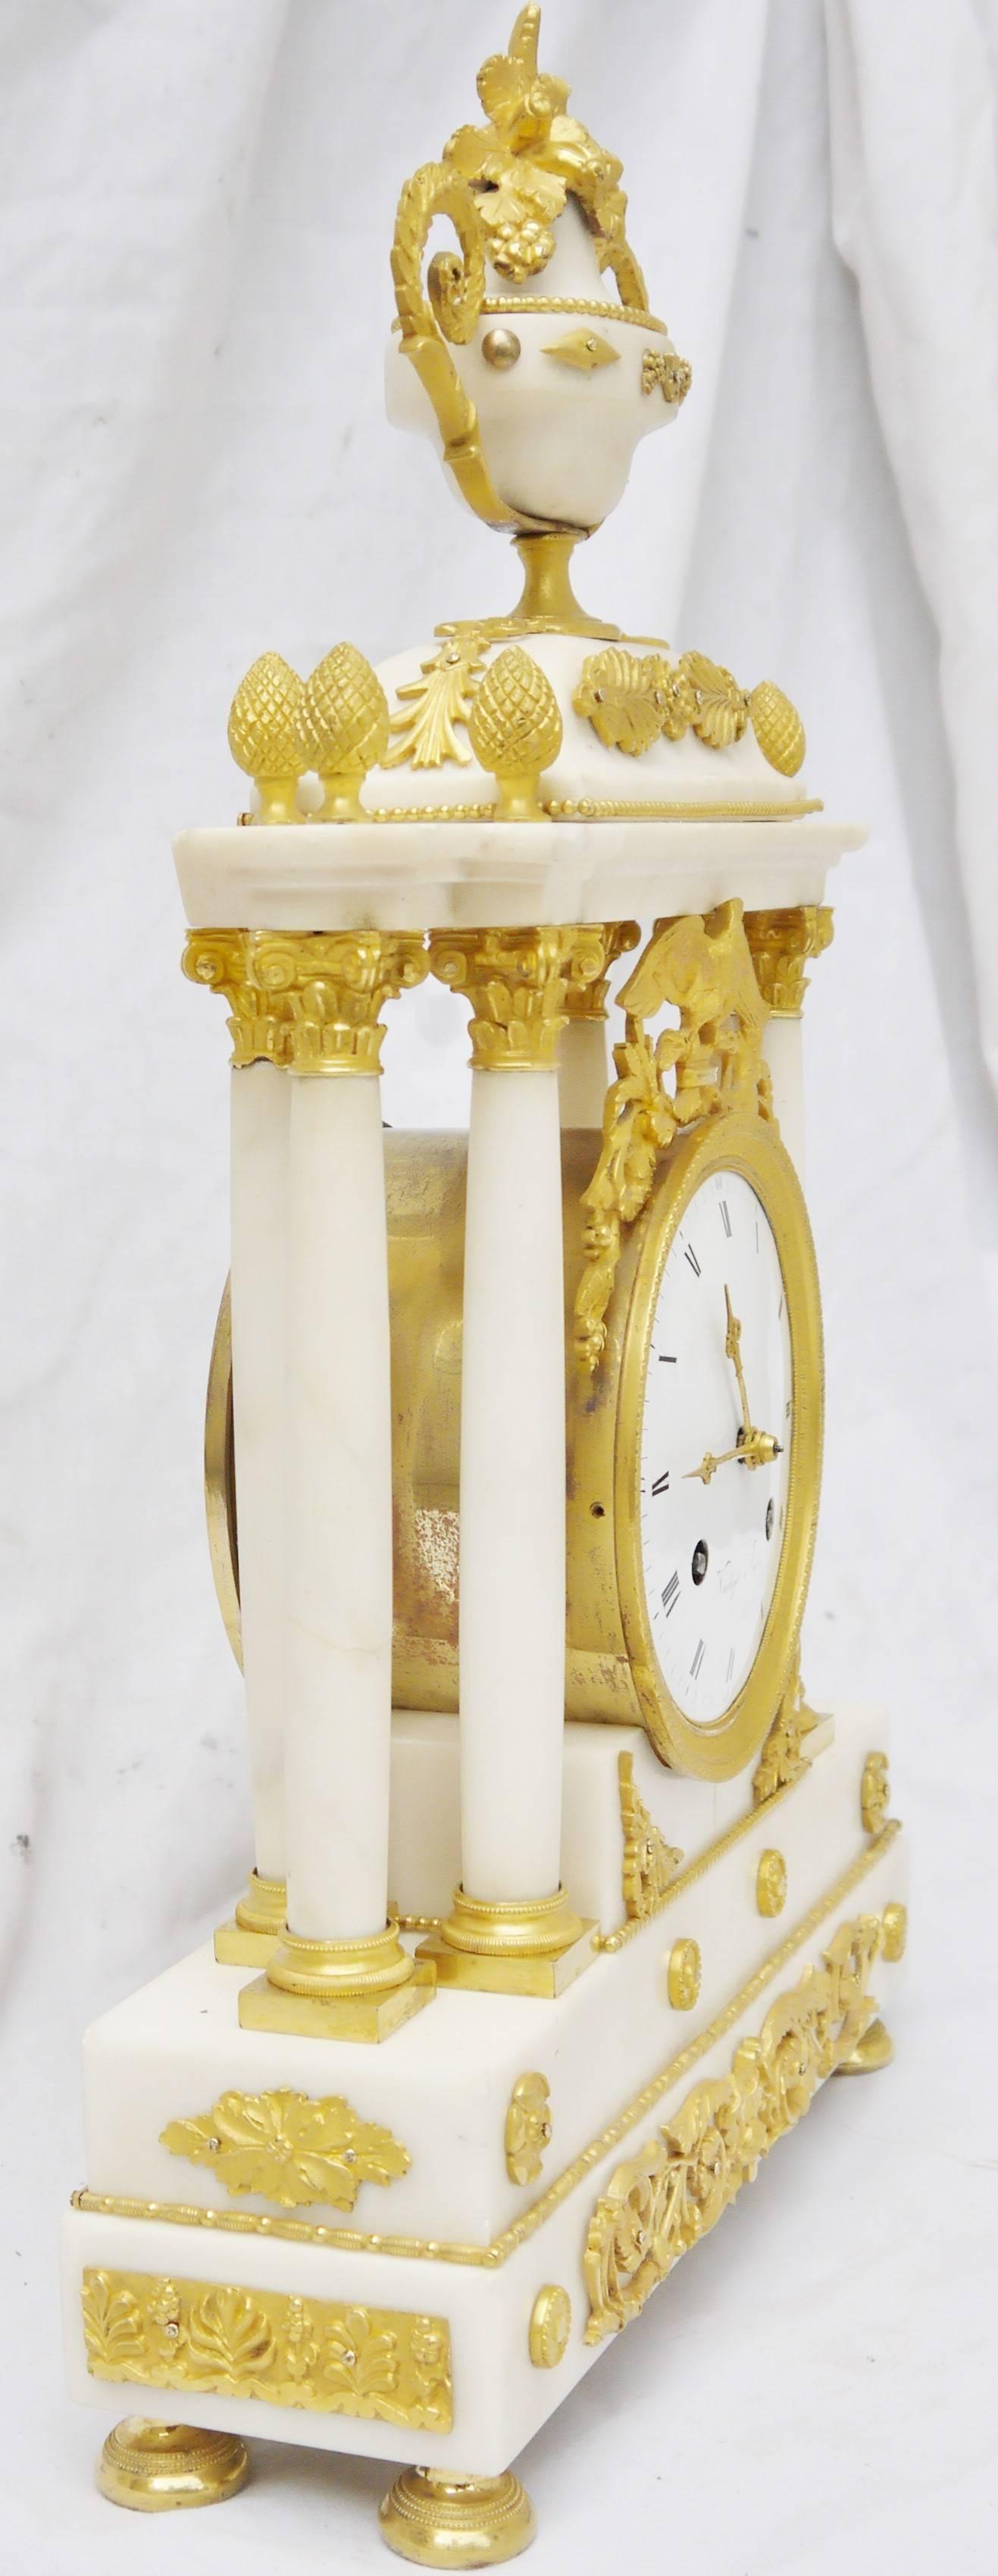 Unique and refined Carrara marble table clock lock, gilt bronze ornamentation, golden by posing gold with mercury, all over it, including its clock hands. Astonishing movement disposition by that time, with six columns:

Paris suspension wire